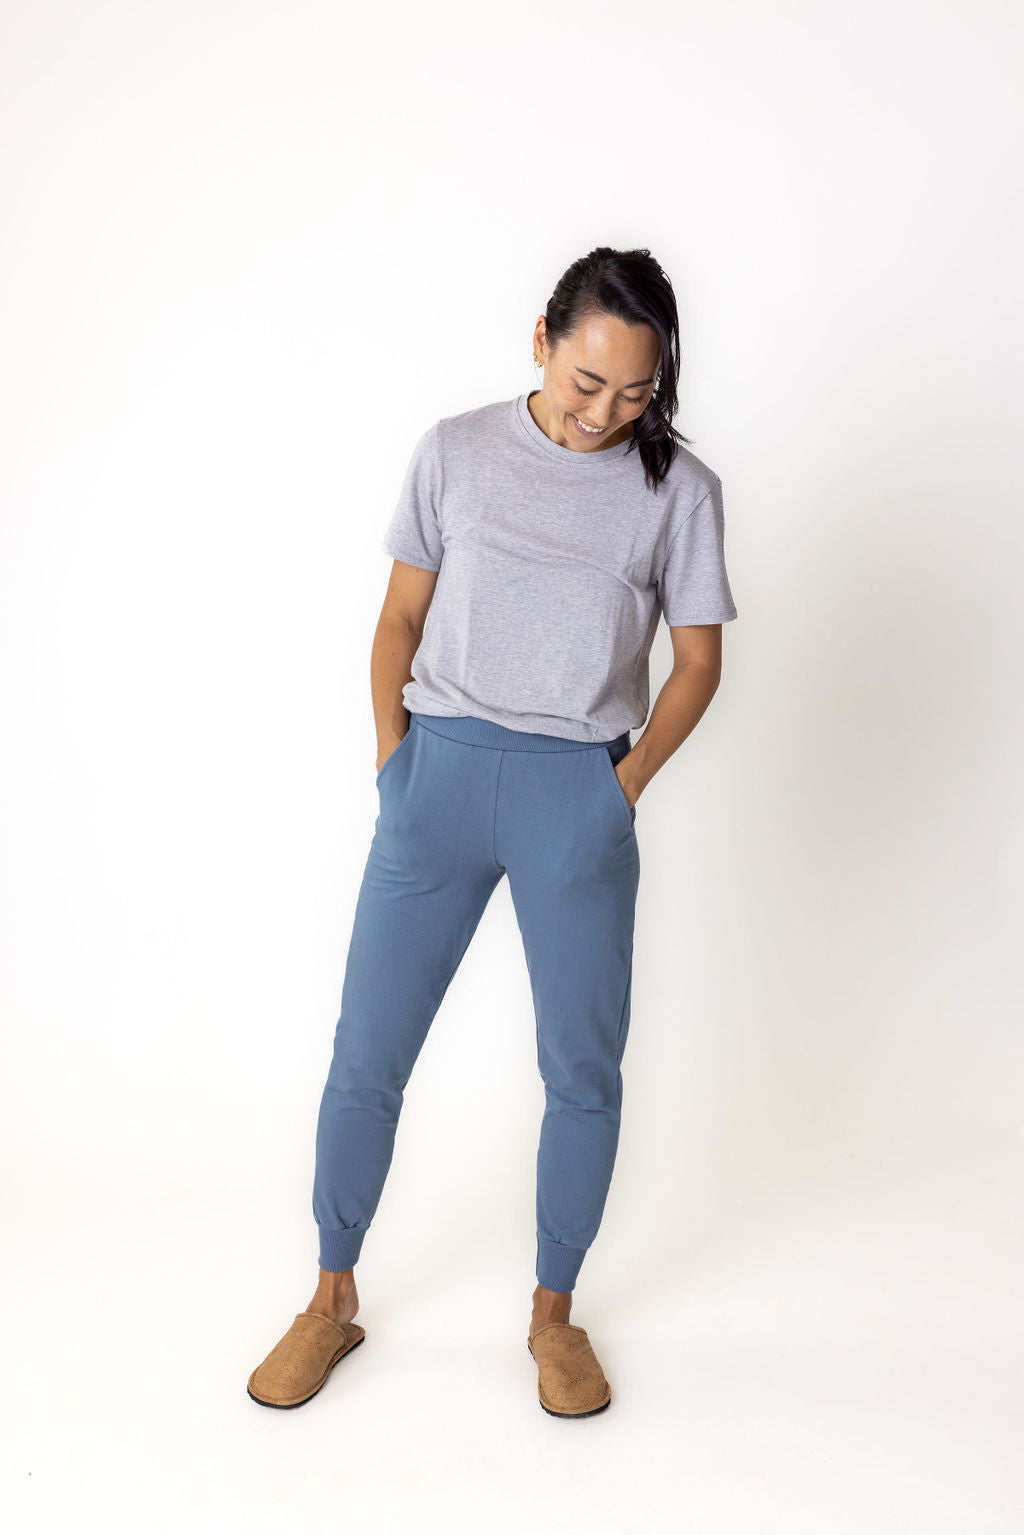 The Women's Jogger in Terry